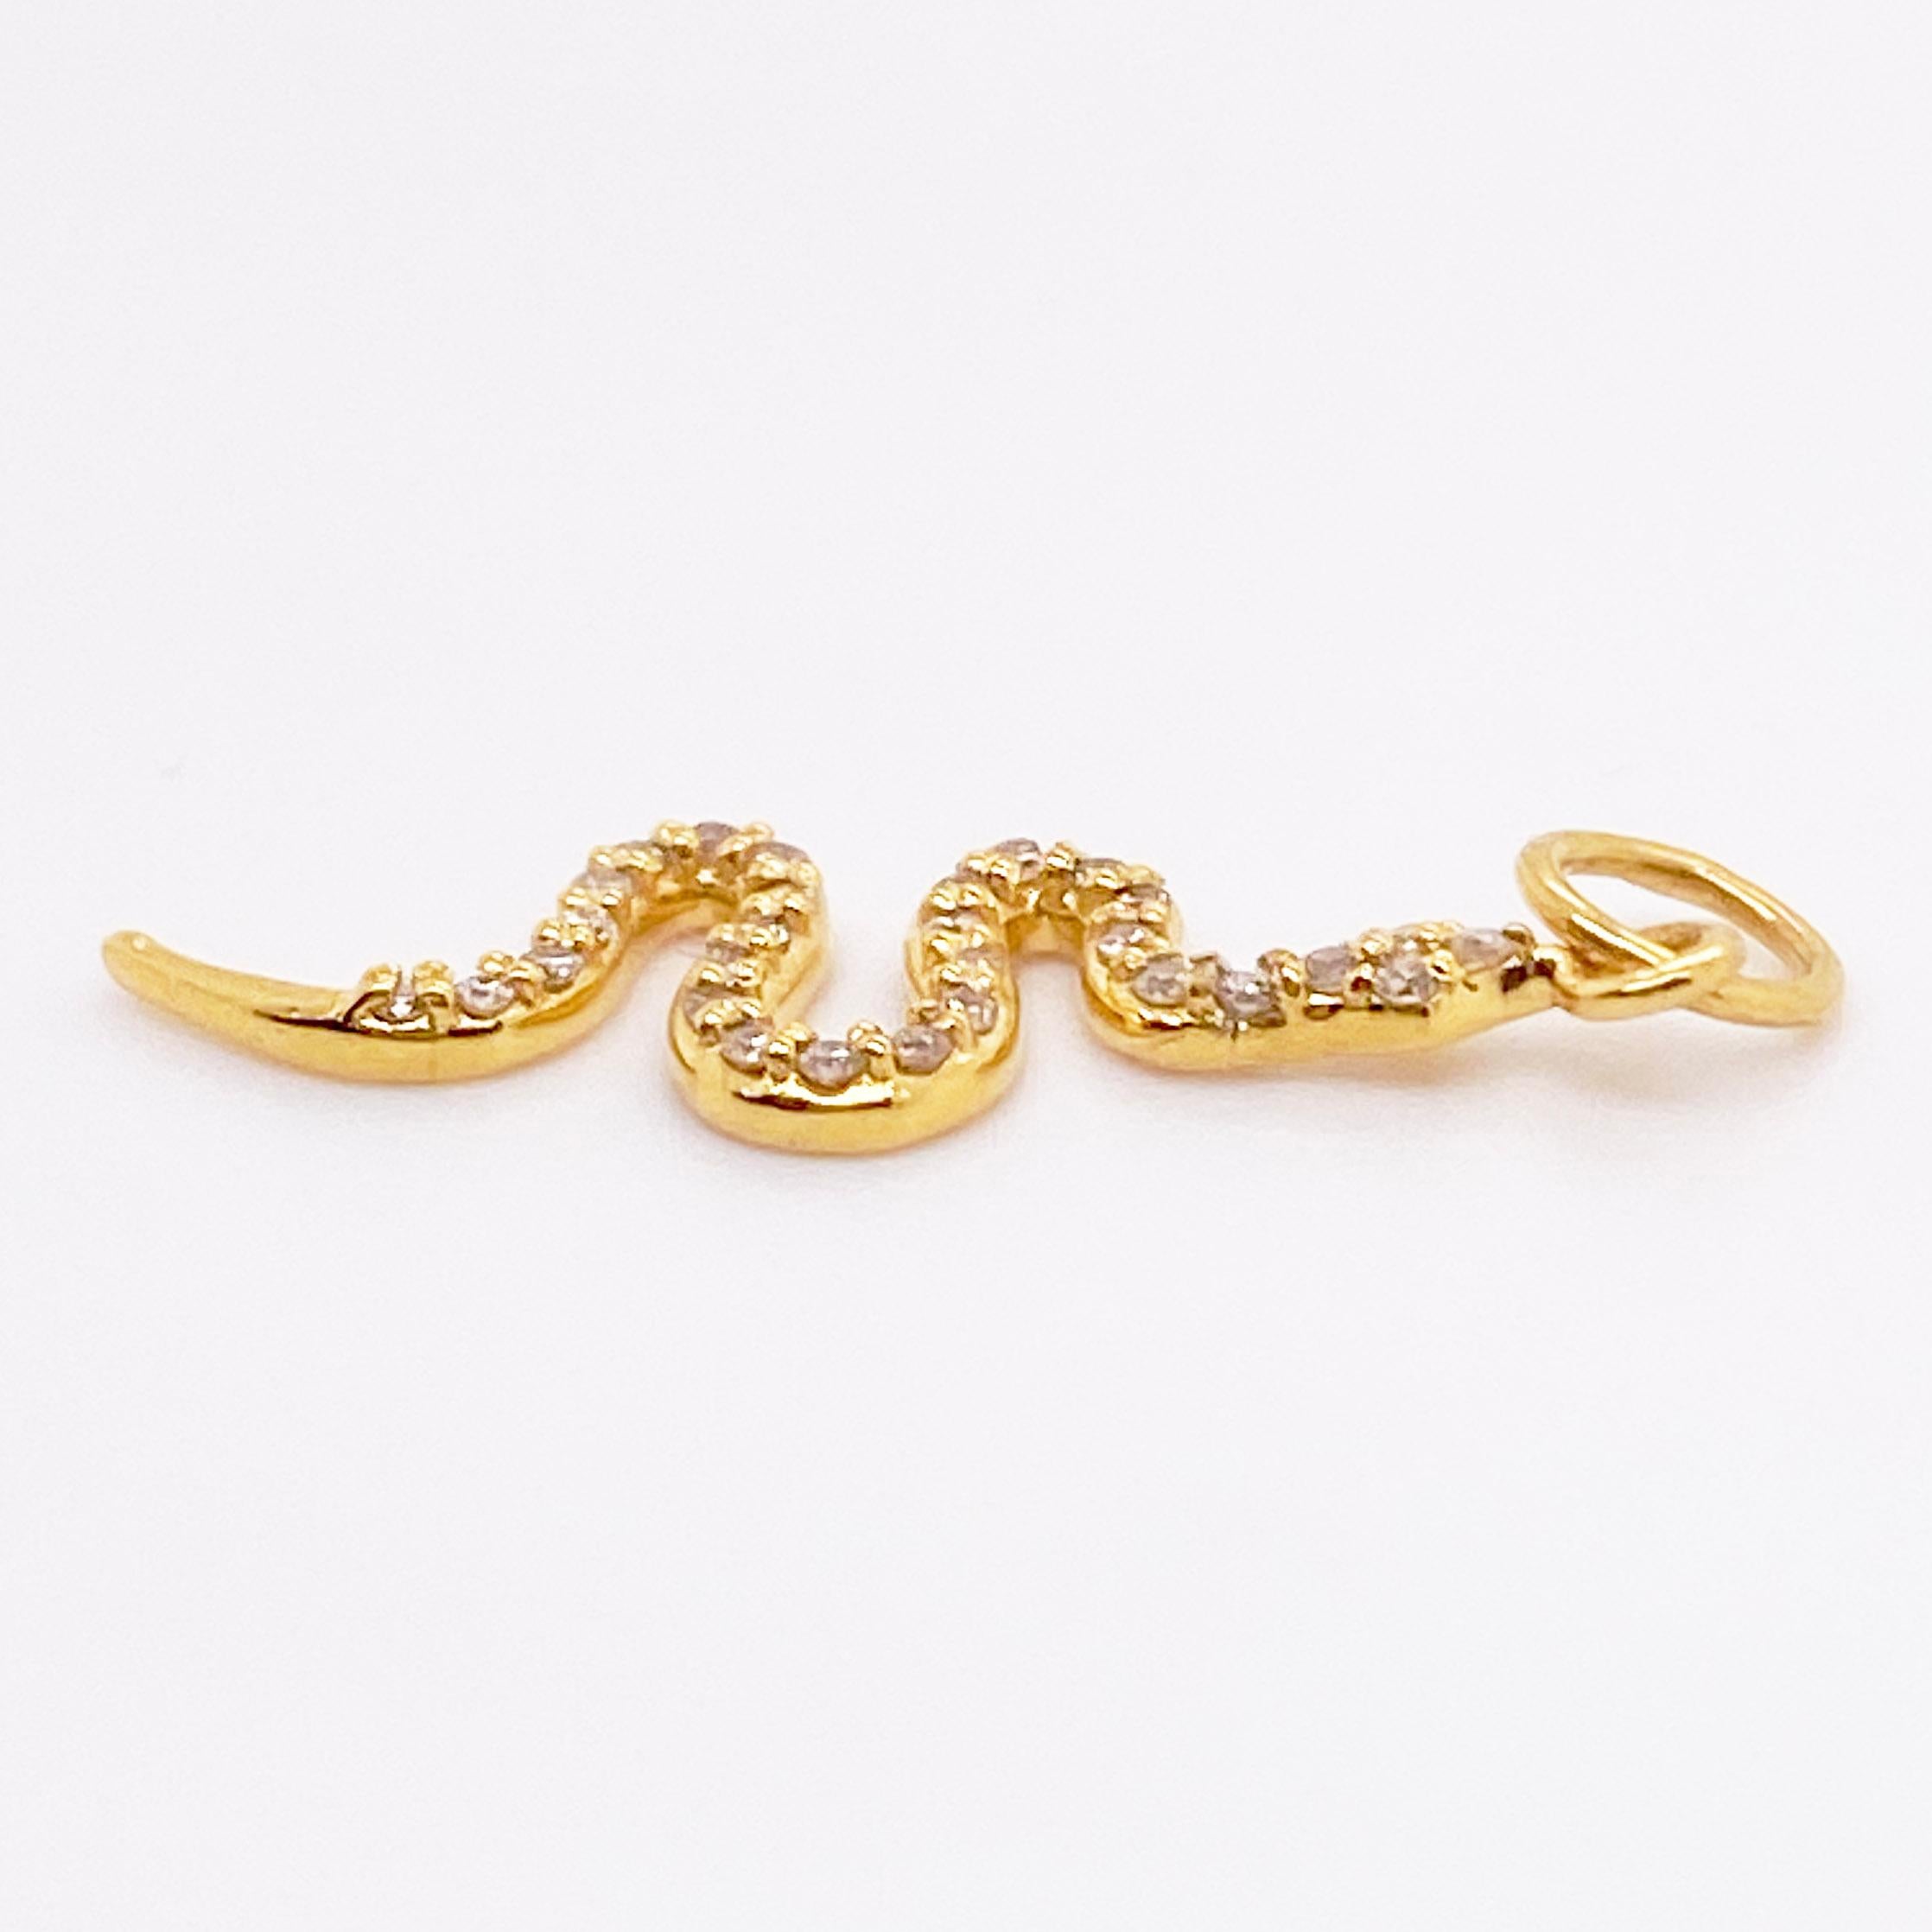 Snakes are the fashion statement of the year! They have shown up in clothes, accessories, and jewelry. Jump on the trend with this beautiful snake pendant that has 28 round brilliant diamonds falling down its back. The details for this gorgeous